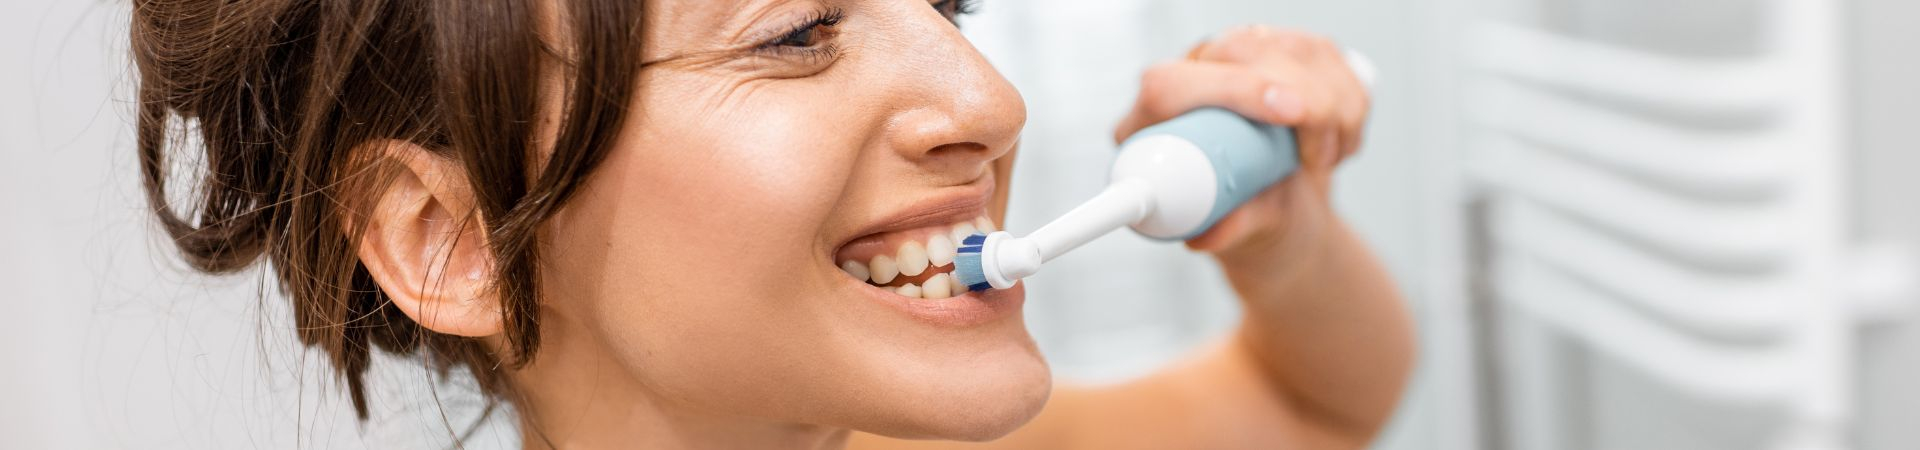 The Best Oral Care Devices for a Healthier and Whiter Smile